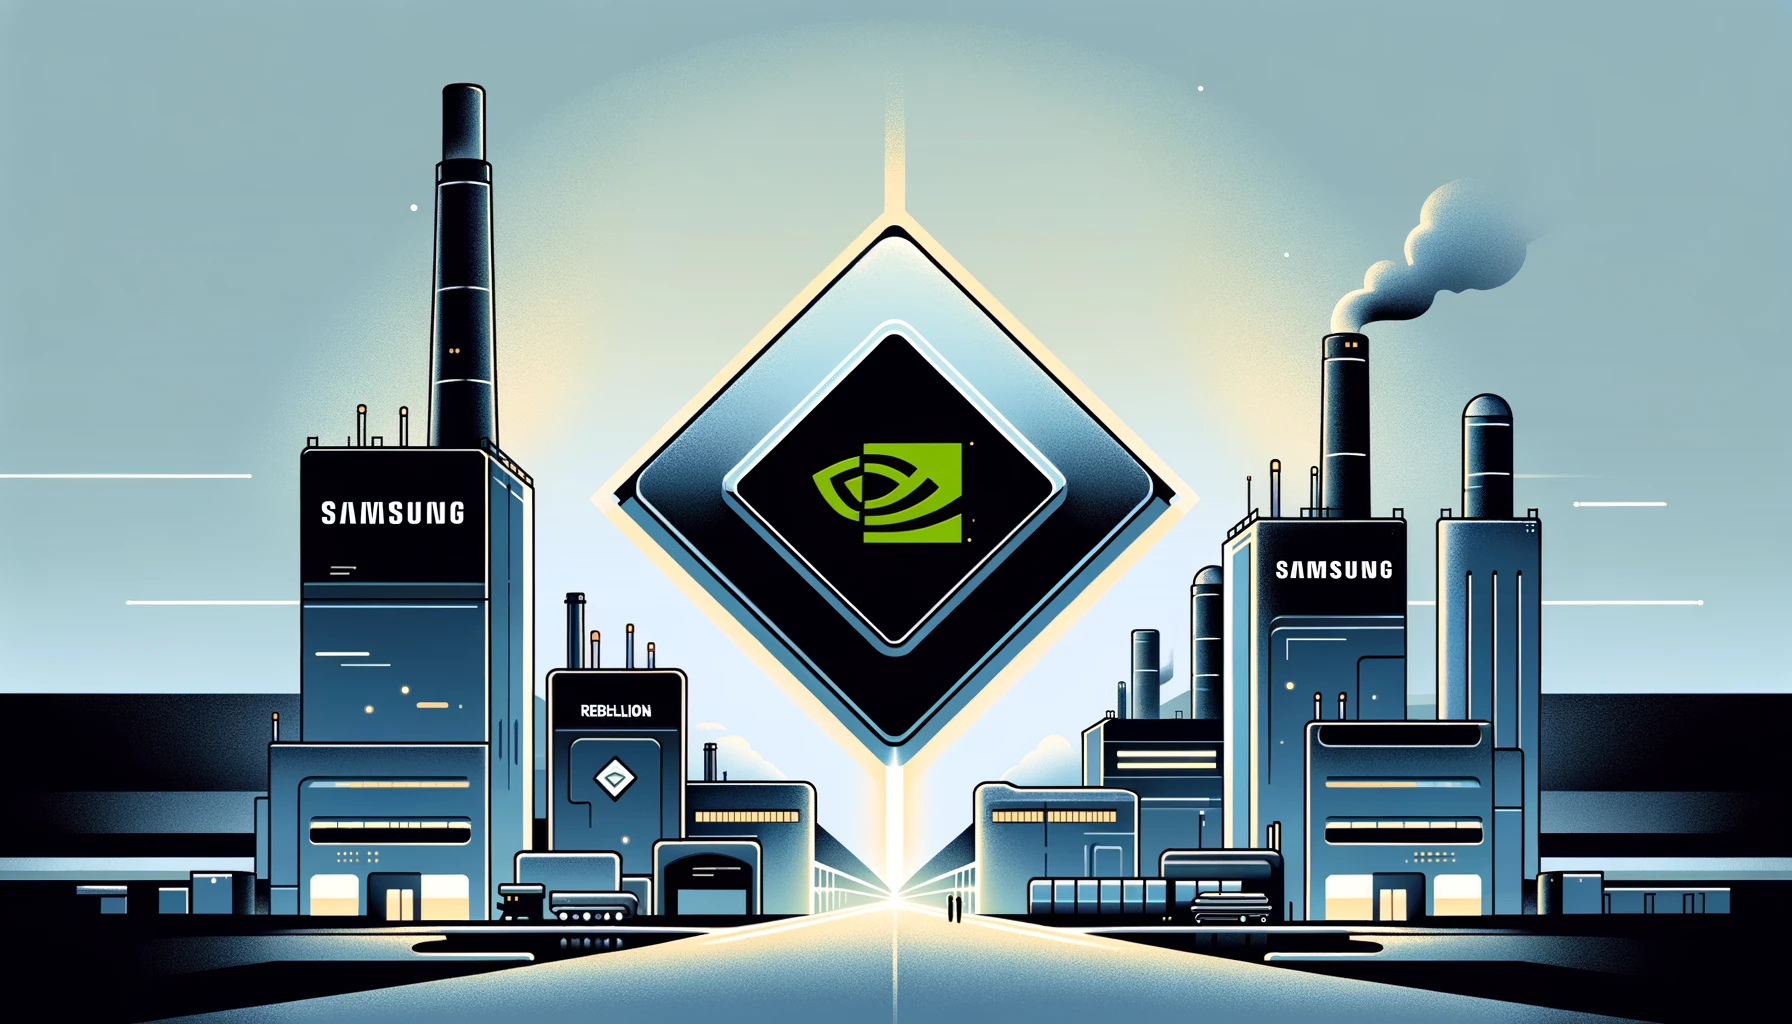 South Korean semiconductor producers Samsung and Rebellions aim to surpass NVIDIA in the chip industry.